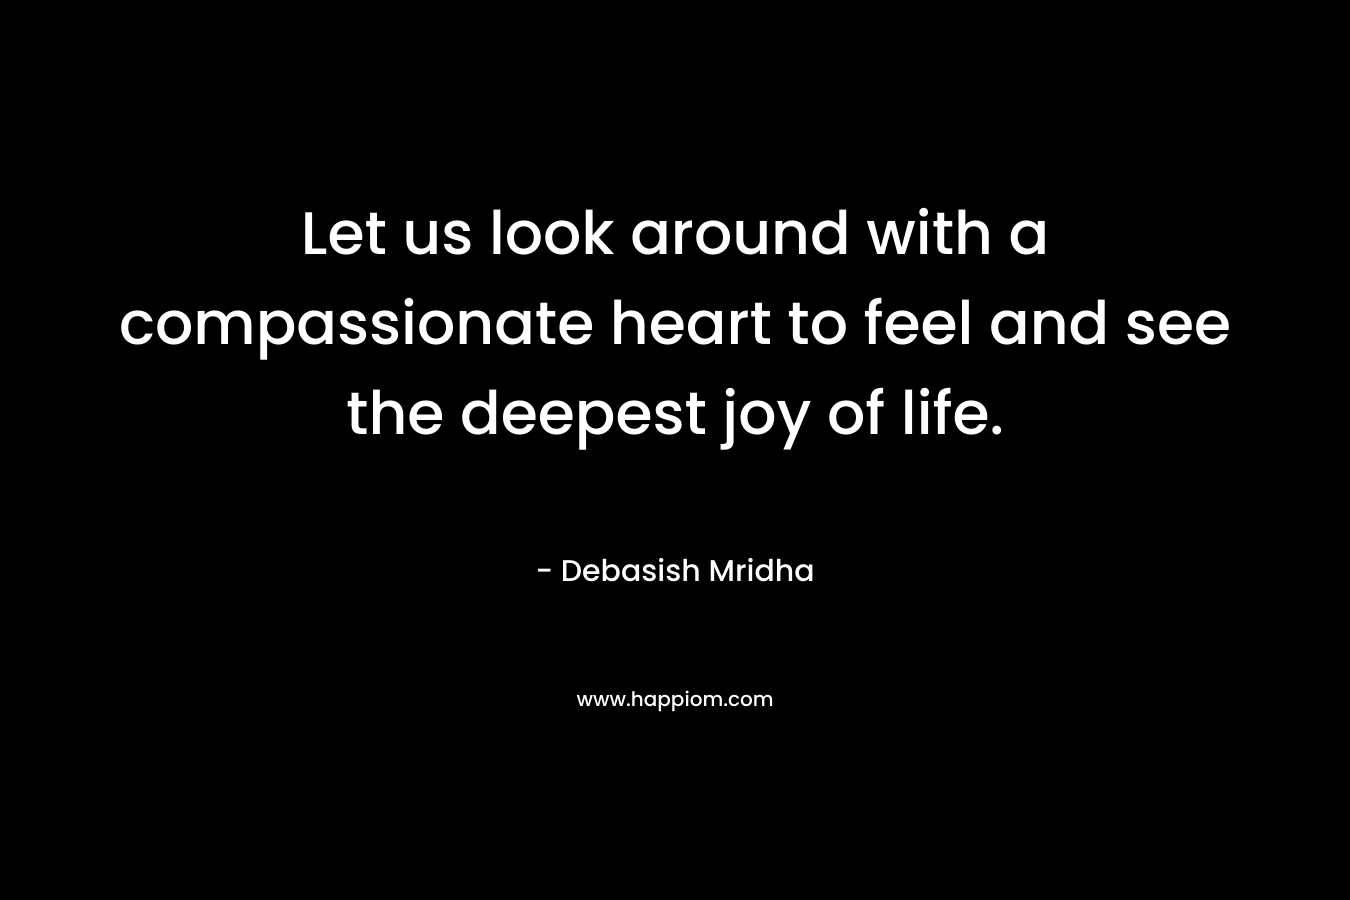 Let us look around with a compassionate heart to feel and see the deepest joy of life. – Debasish Mridha